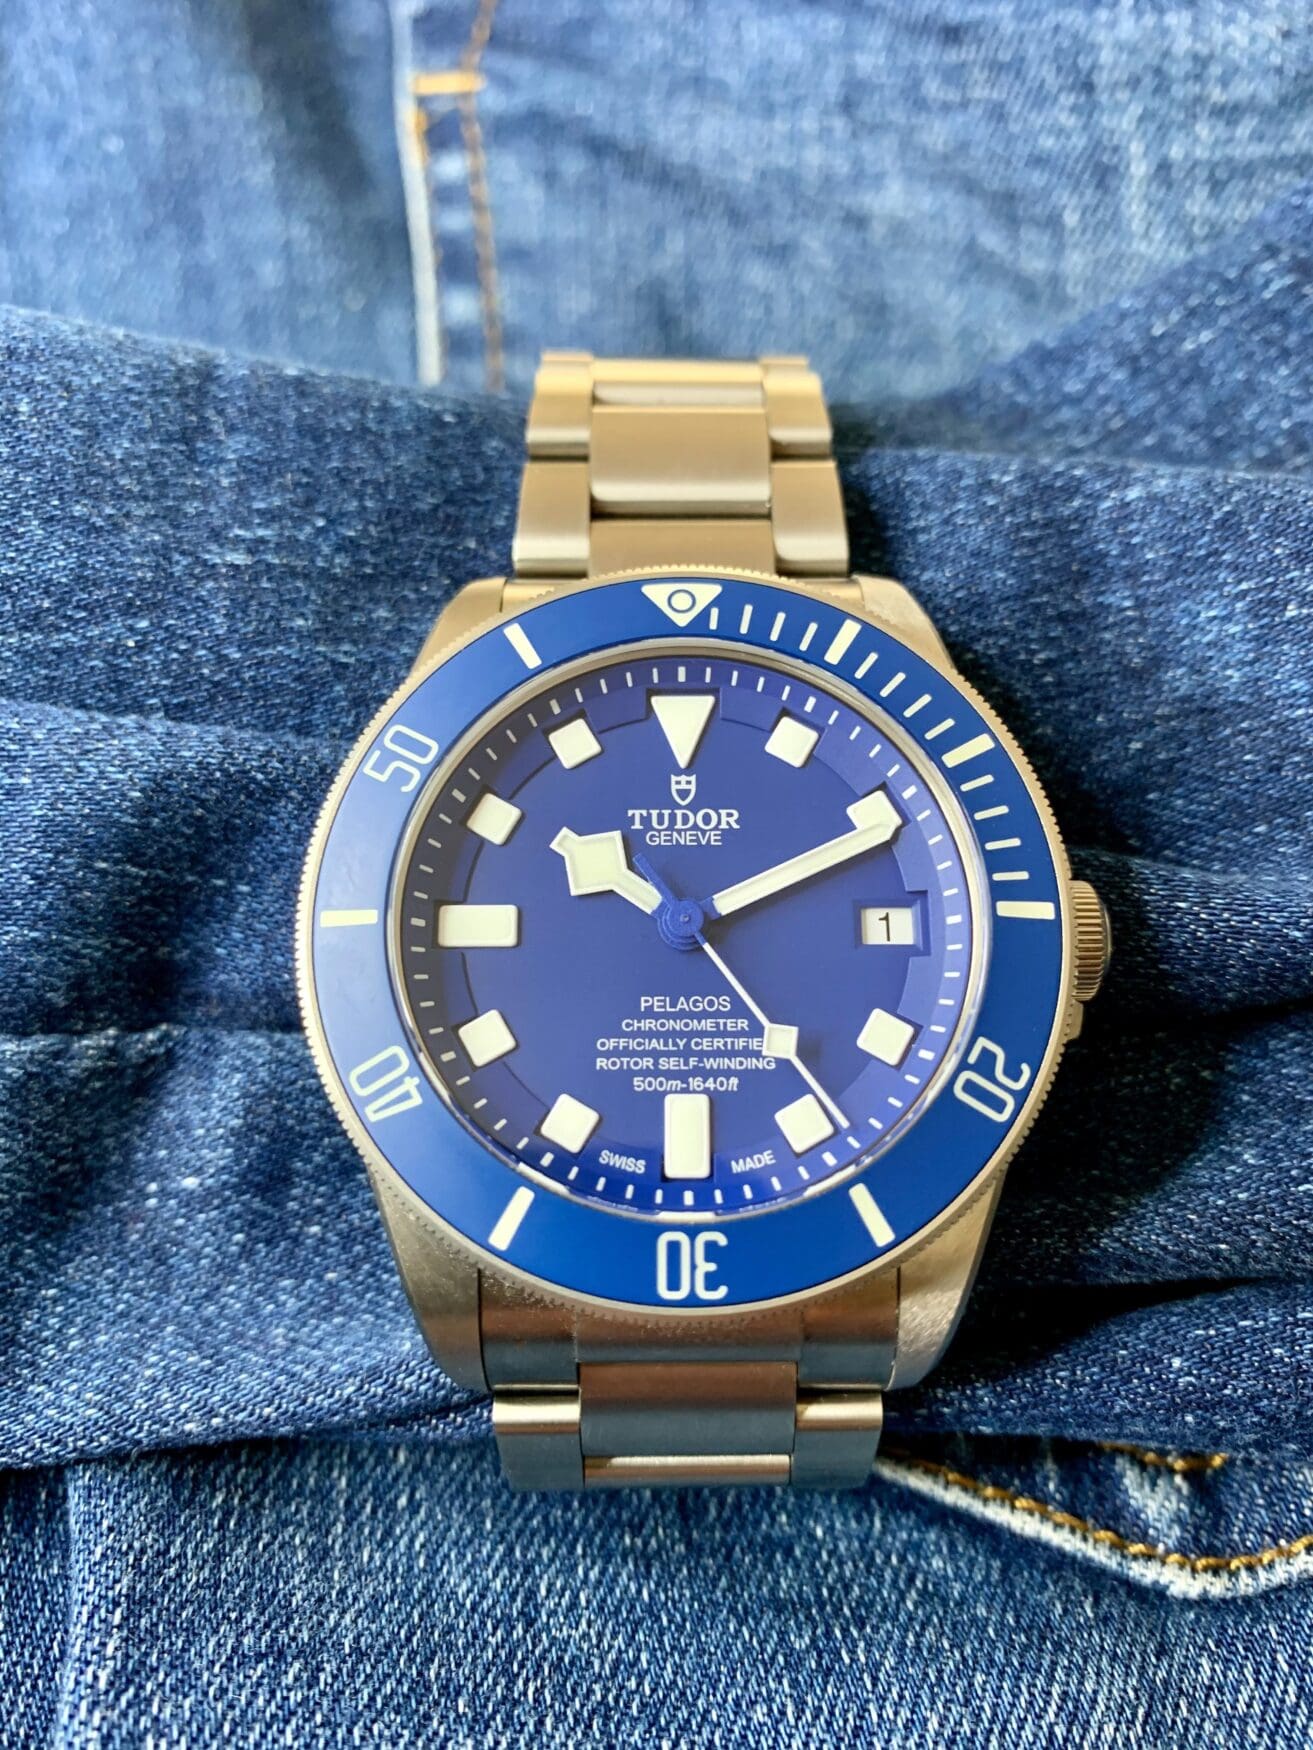 Taking another look at the curiously underrated Tudor Pelagos